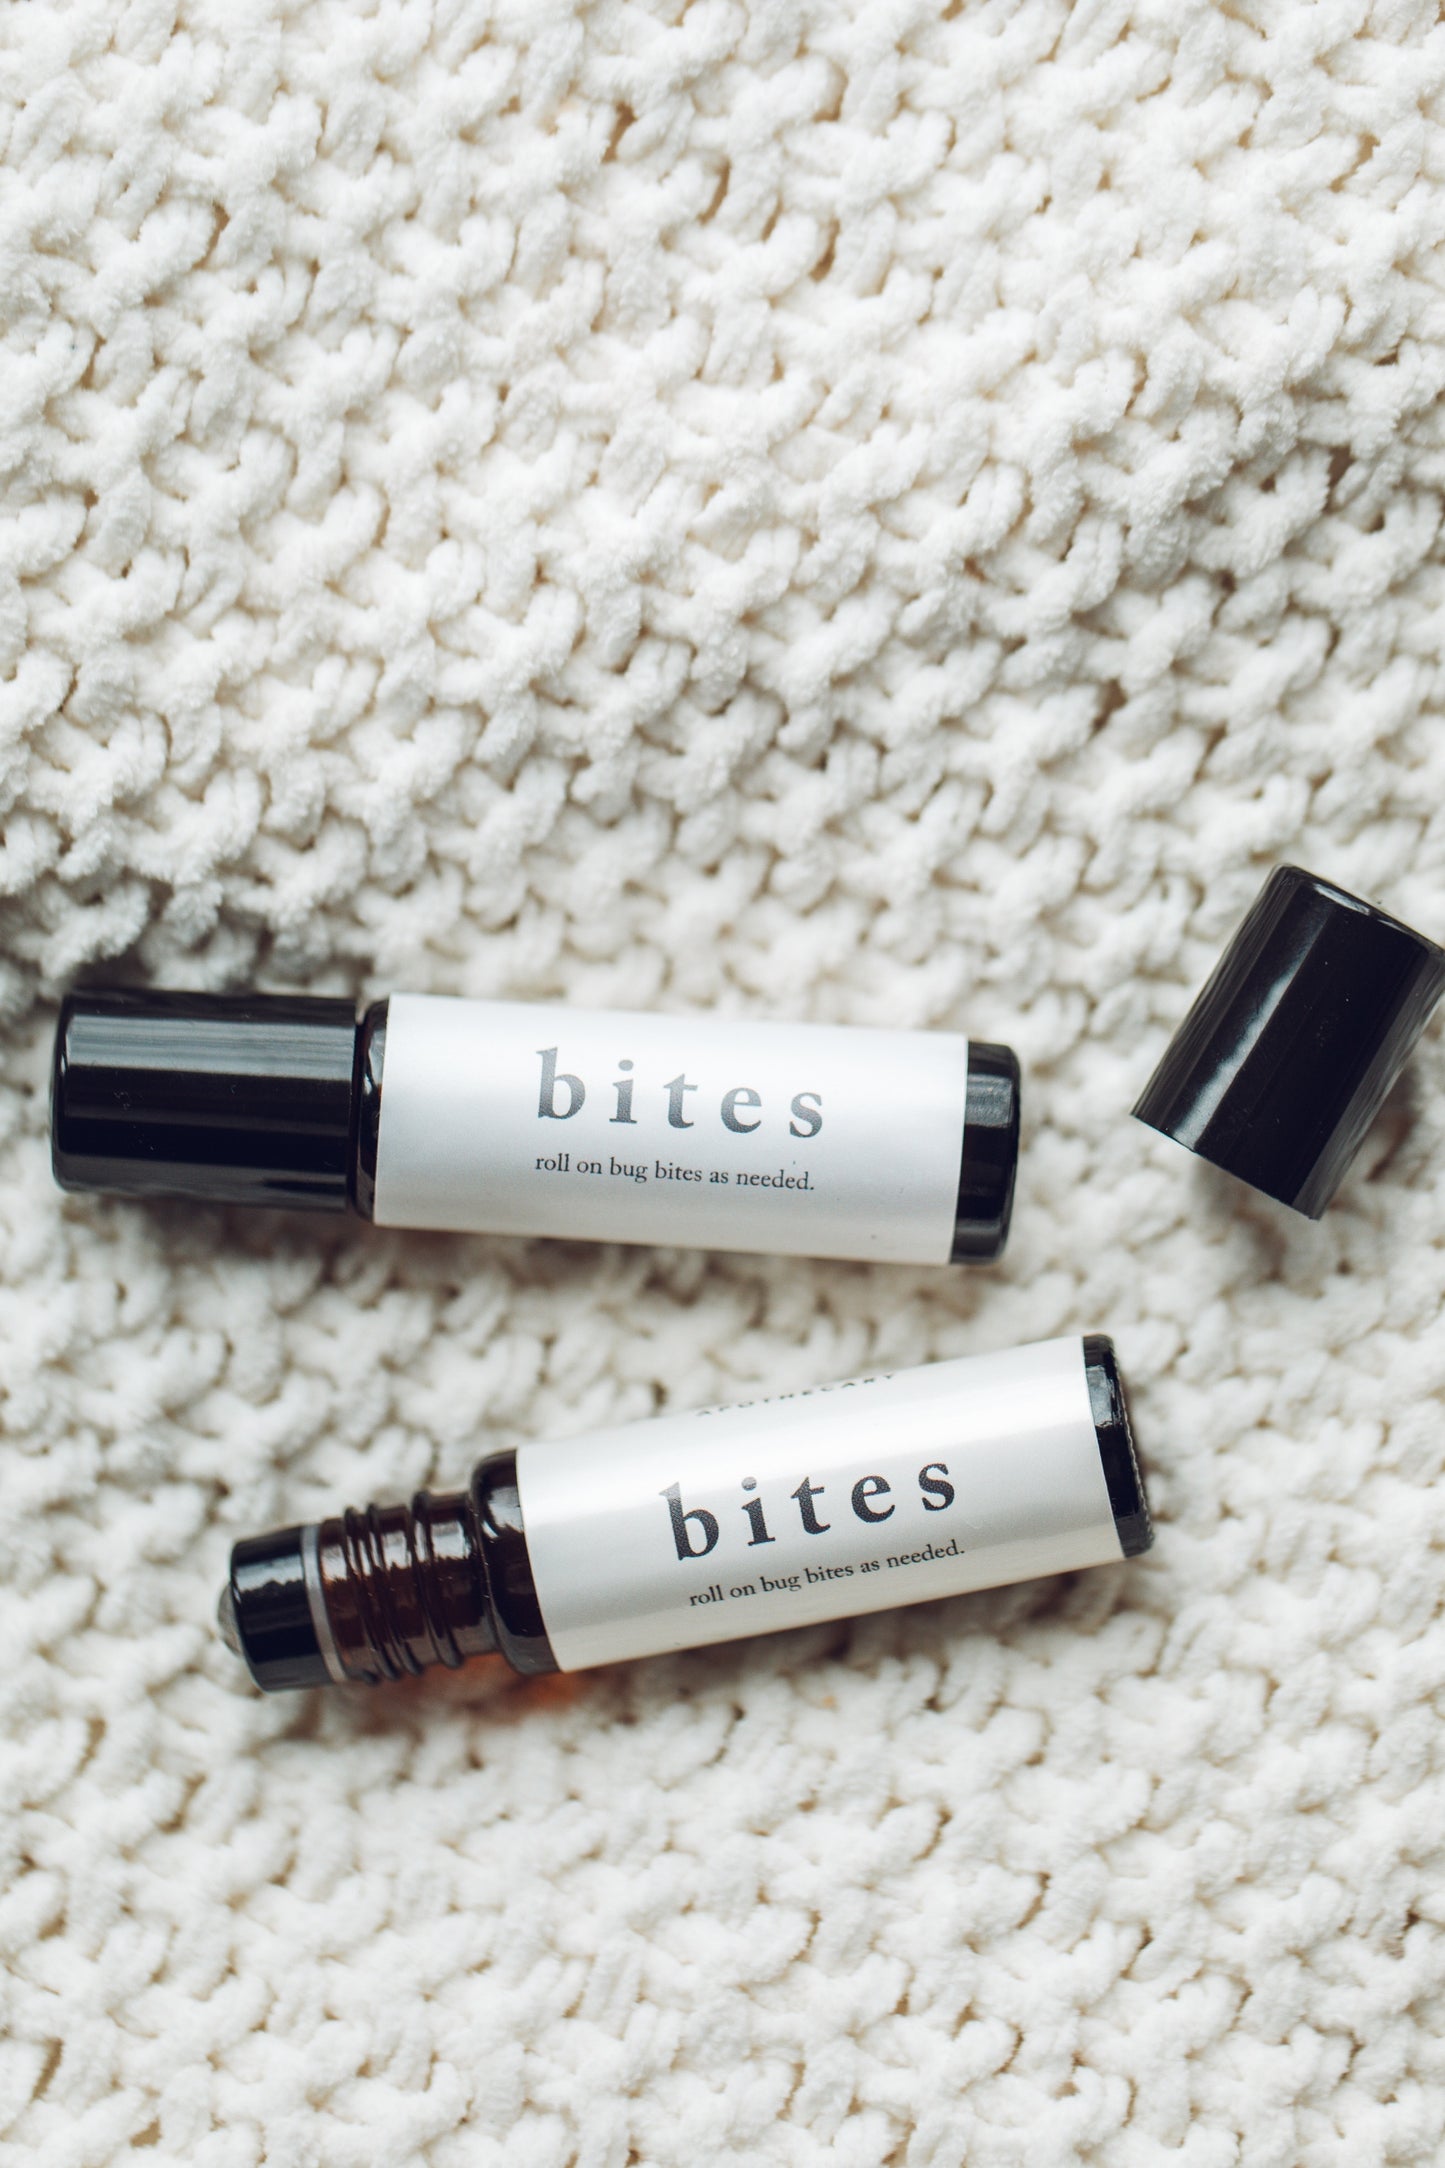 Bug Bite Relief Roll On. Natural Remedy Bug Bites, Mosquito Bites + Stings. Natural Itch Relief Essential Oil Blend. Herbal Itch Stick Oil